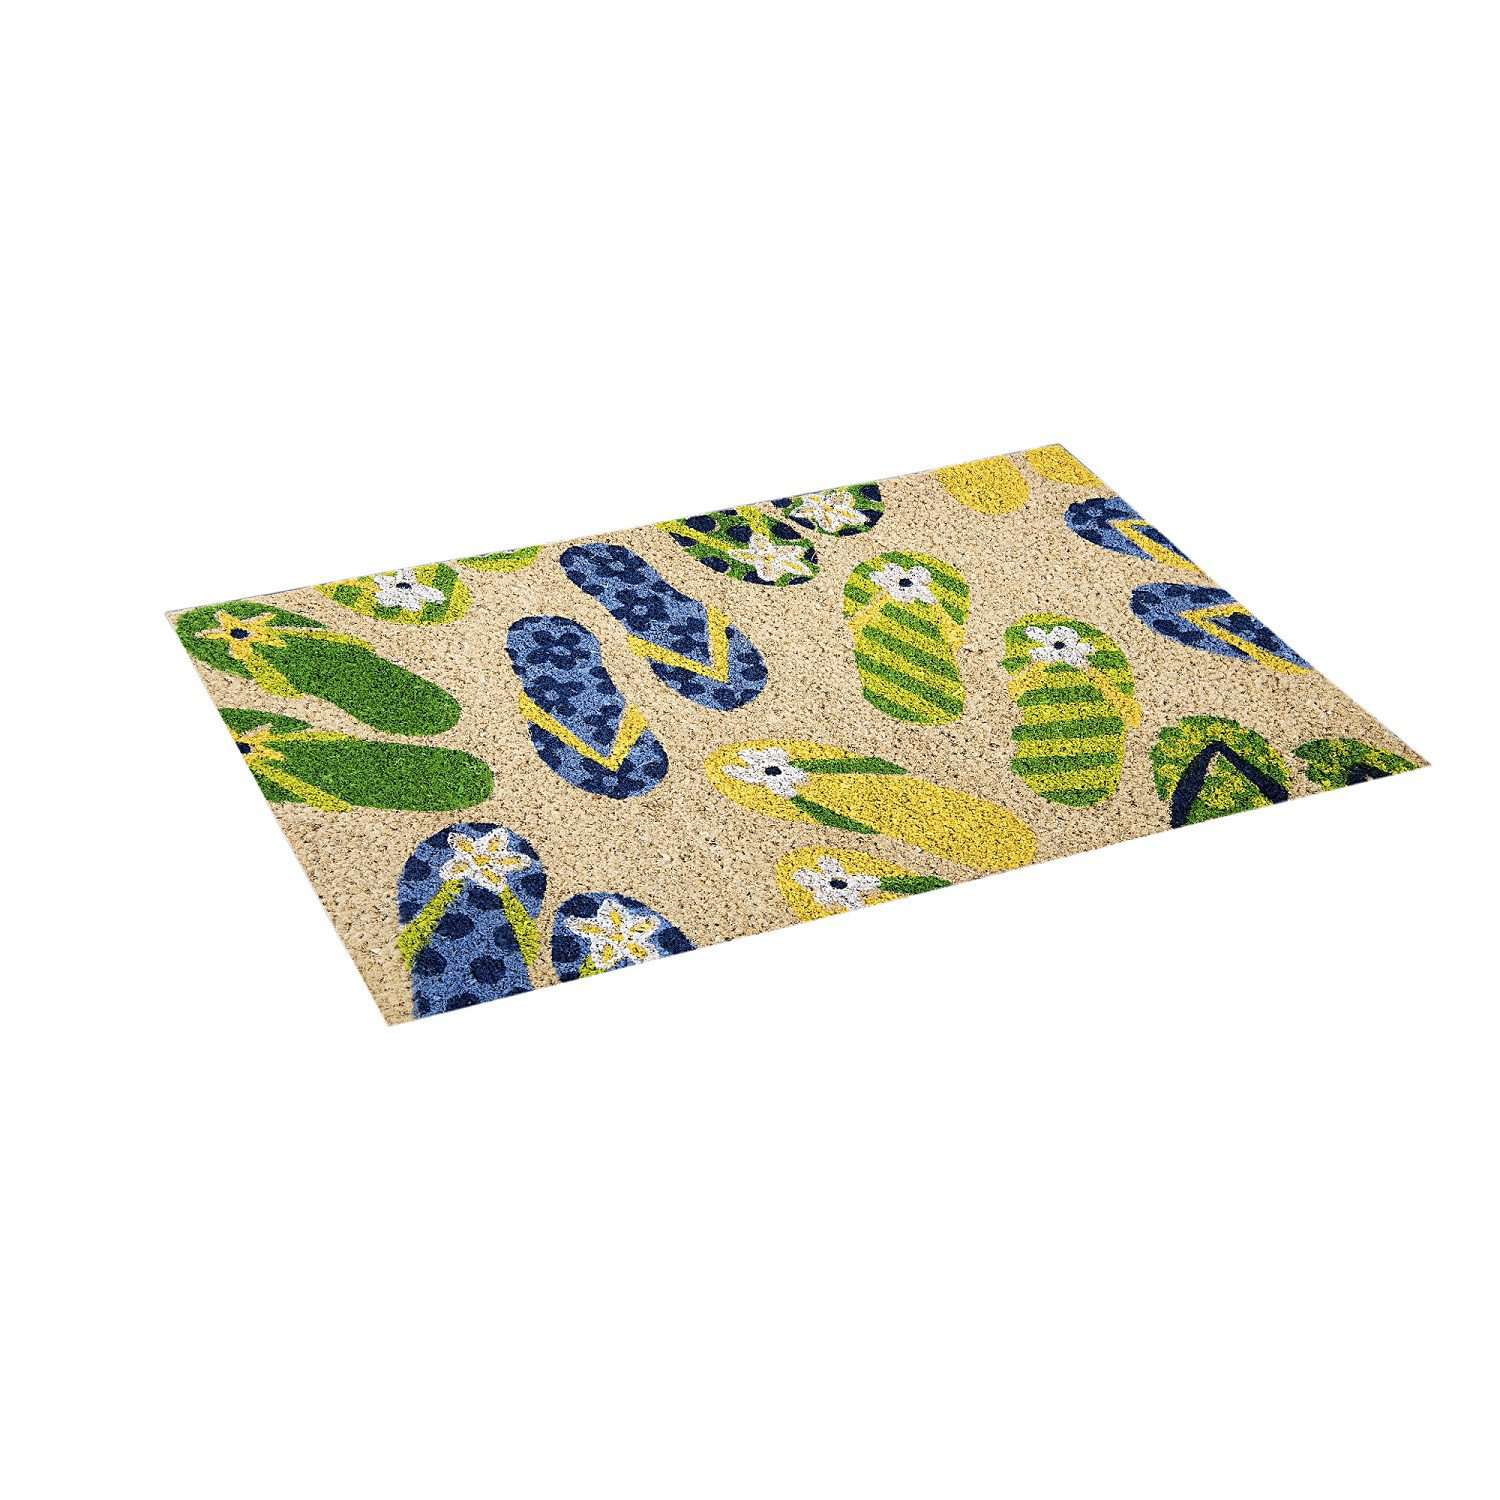 SWHF Premium Coir and Rubber Quirky Design Door and Floor Mat : Flip-Flop - SWHF